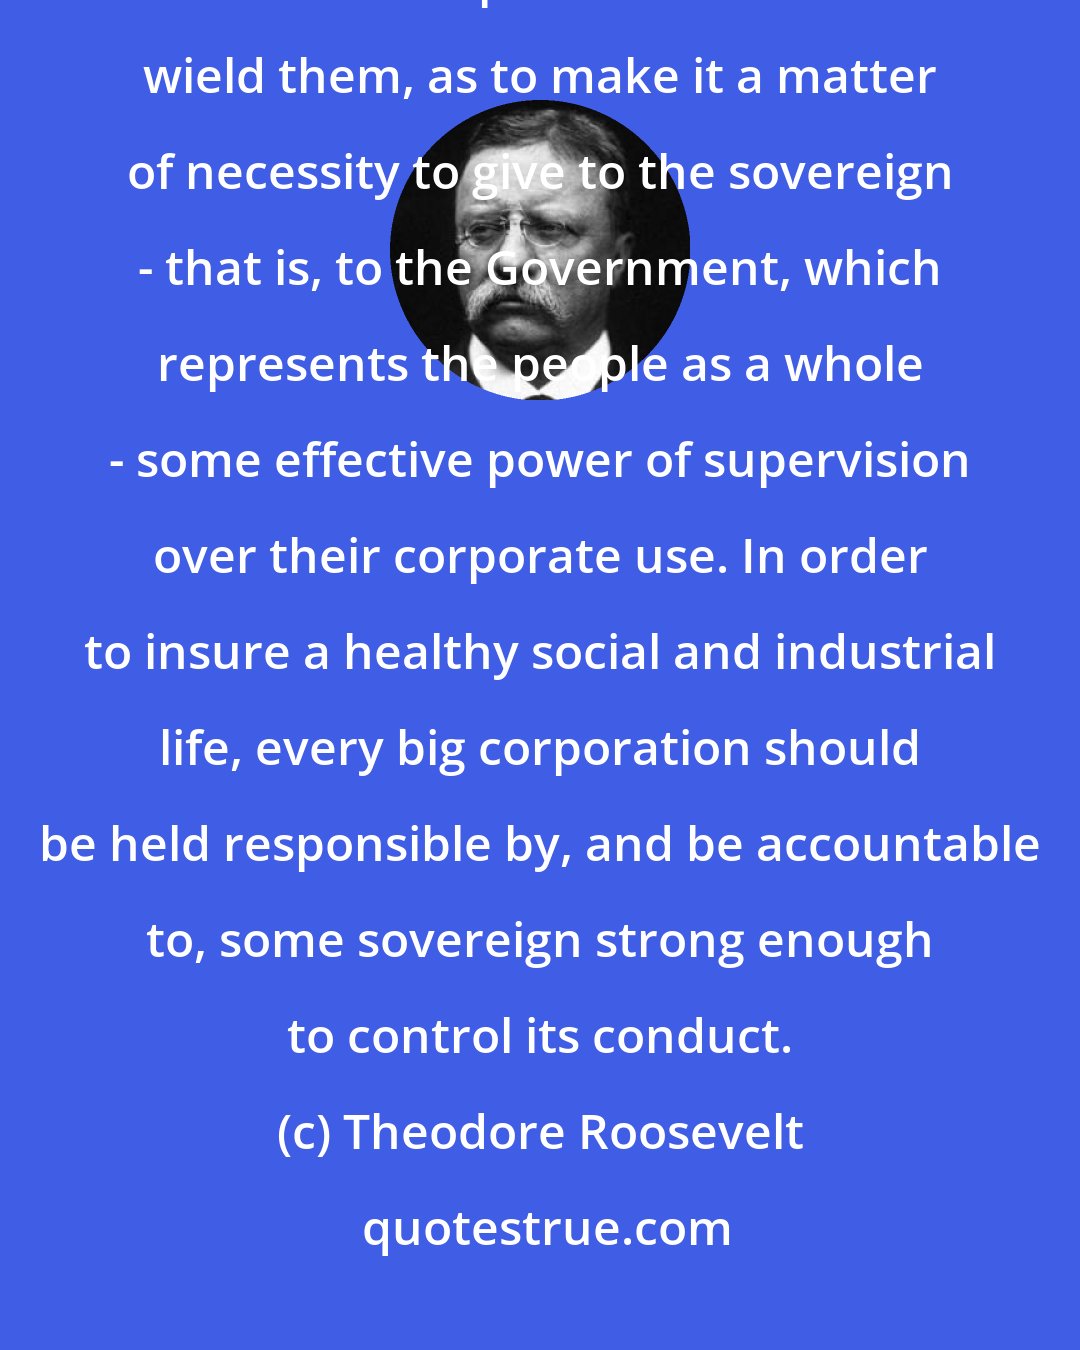 Theodore Roosevelt: The fortunes amassed through corporate organization are now so large, and vest such power in those that wield them, as to make it a matter of necessity to give to the sovereign - that is, to the Government, which represents the people as a whole - some effective power of supervision over their corporate use. In order to insure a healthy social and industrial life, every big corporation should be held responsible by, and be accountable to, some sovereign strong enough to control its conduct.